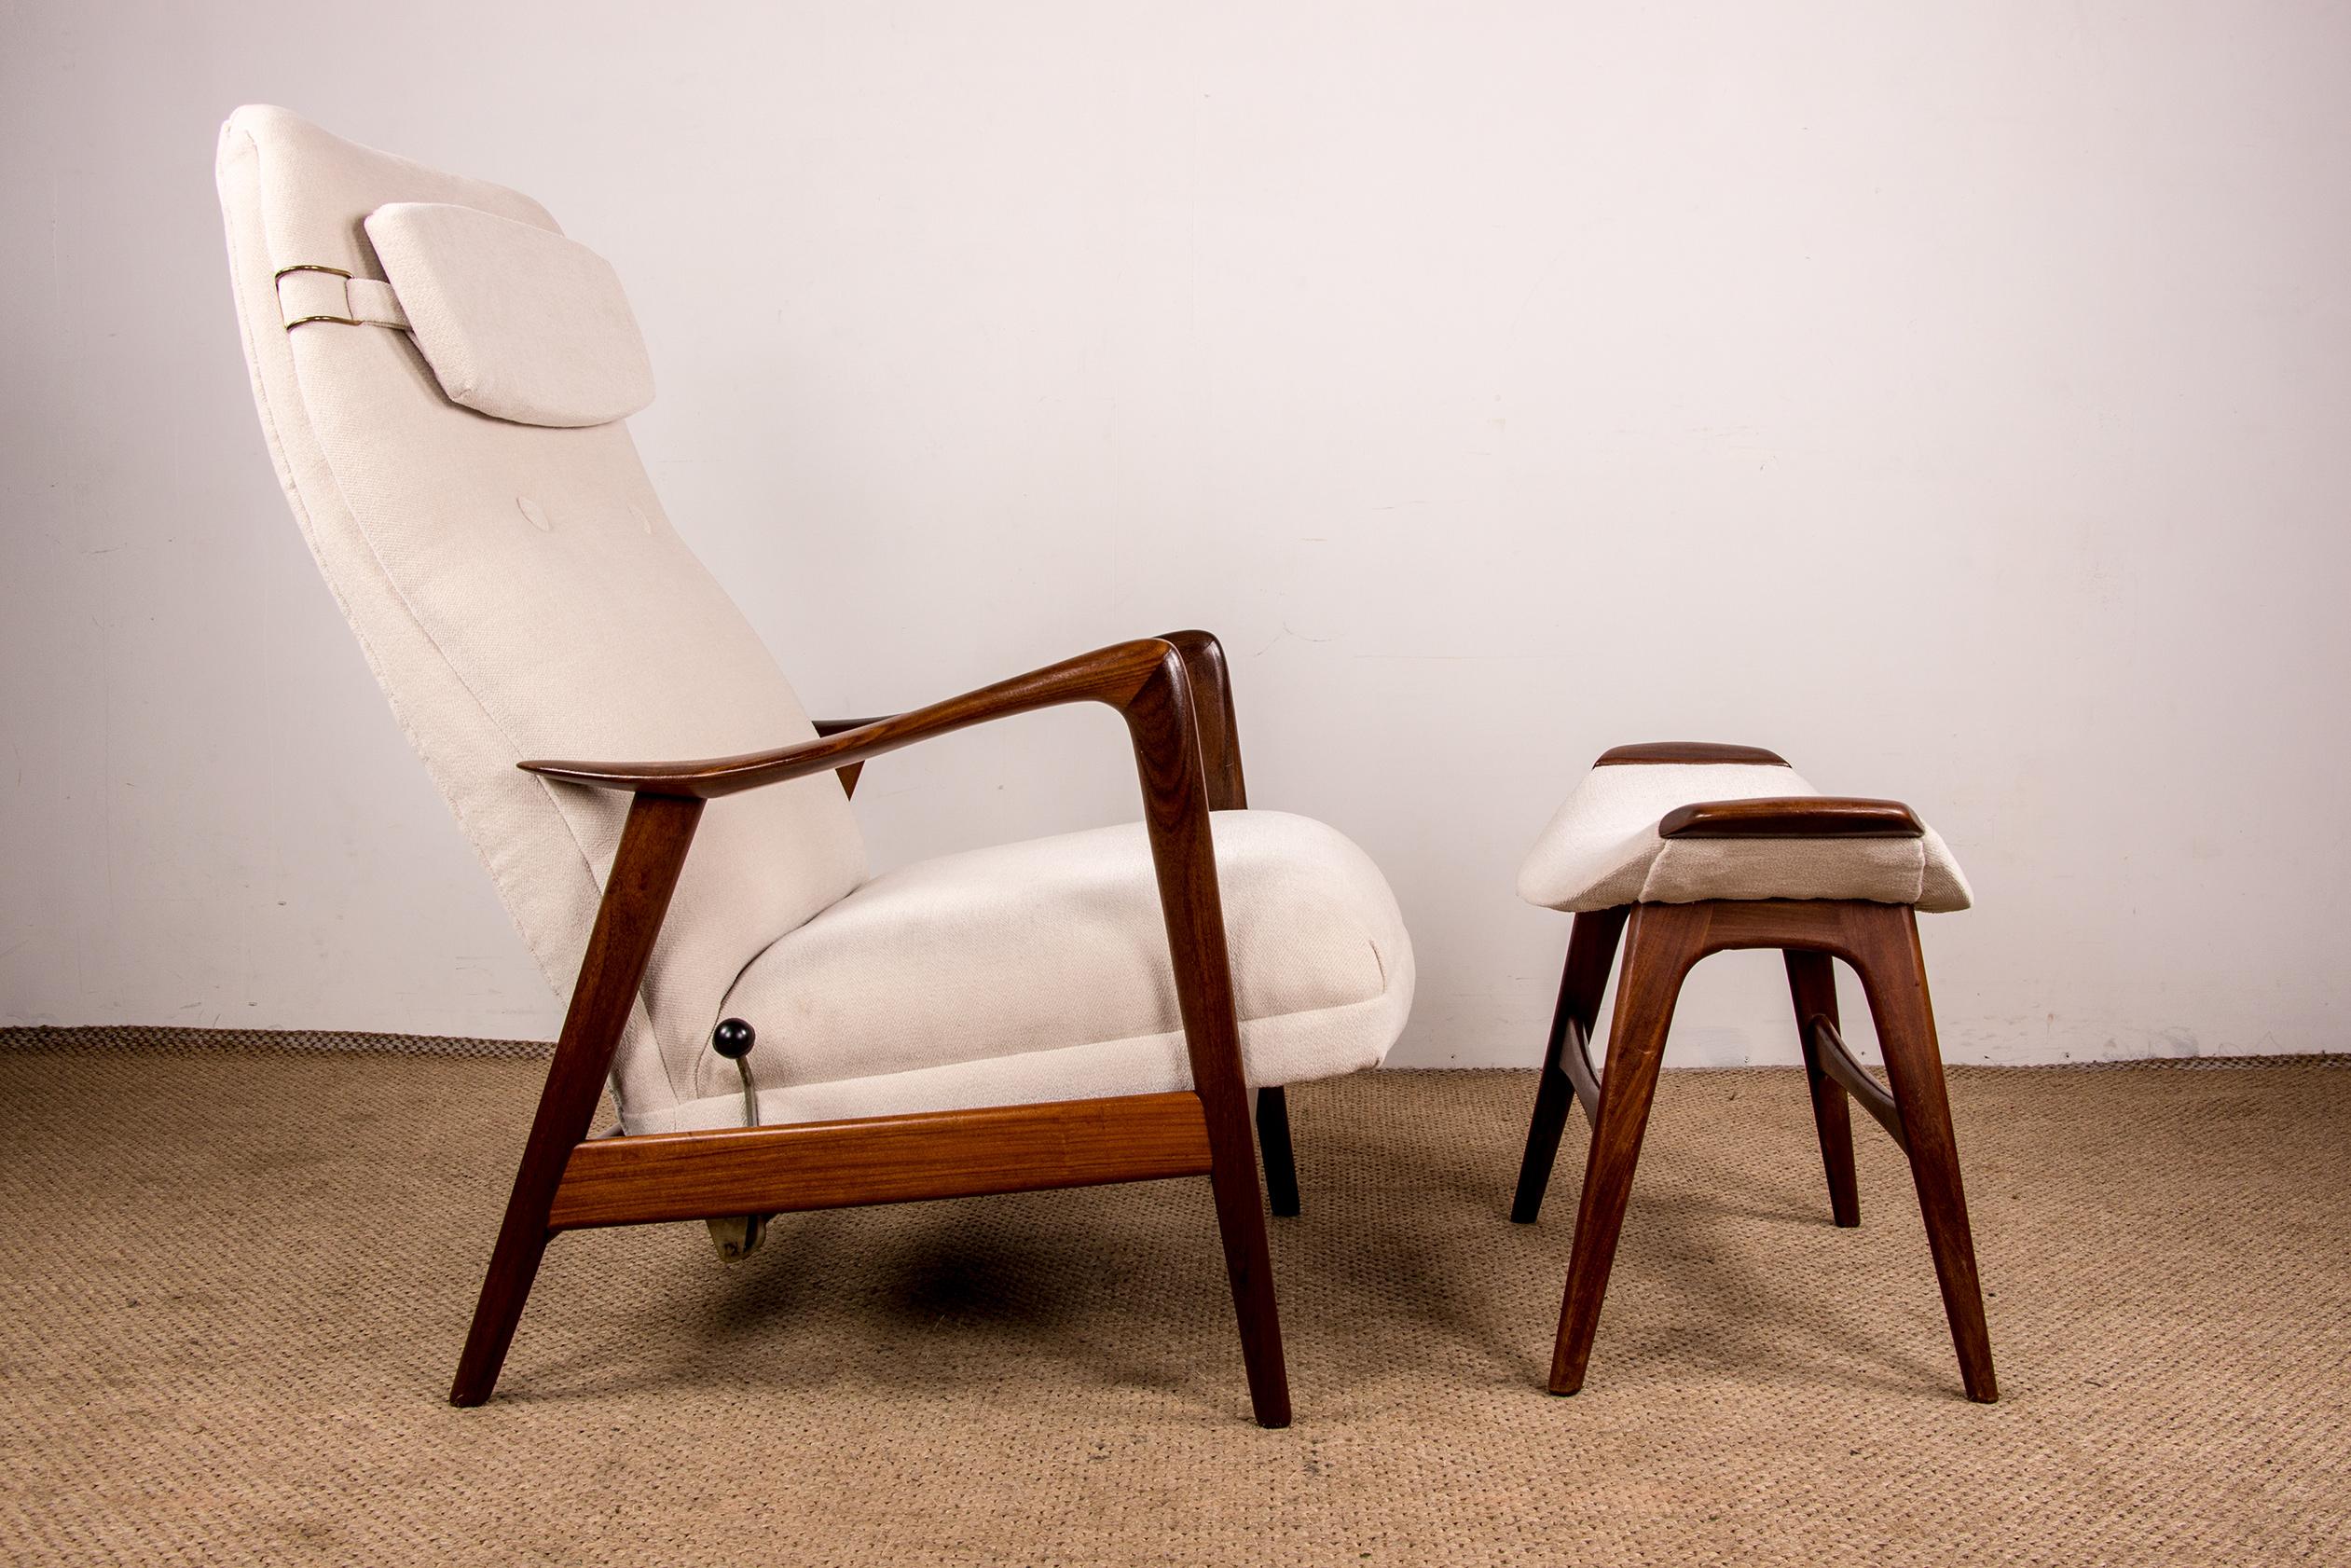 Large Scandinavian Teak Armchair with Ottomans by Folke Ohlsson for Westnofa 196 For Sale 4